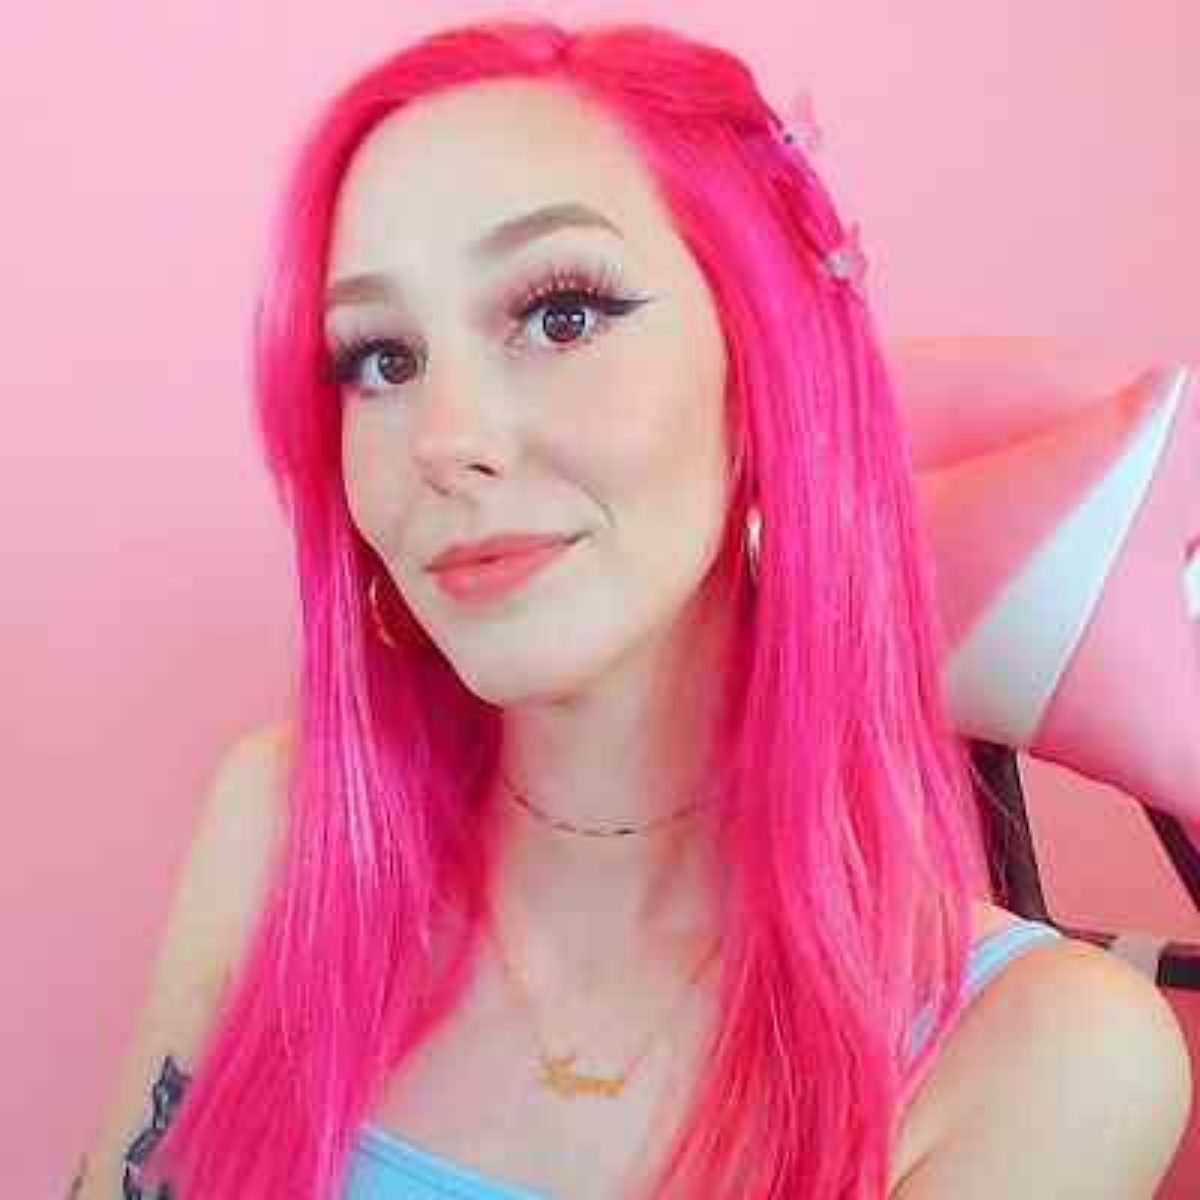 Meganplays Biography Age Net Worth Married Nationality.